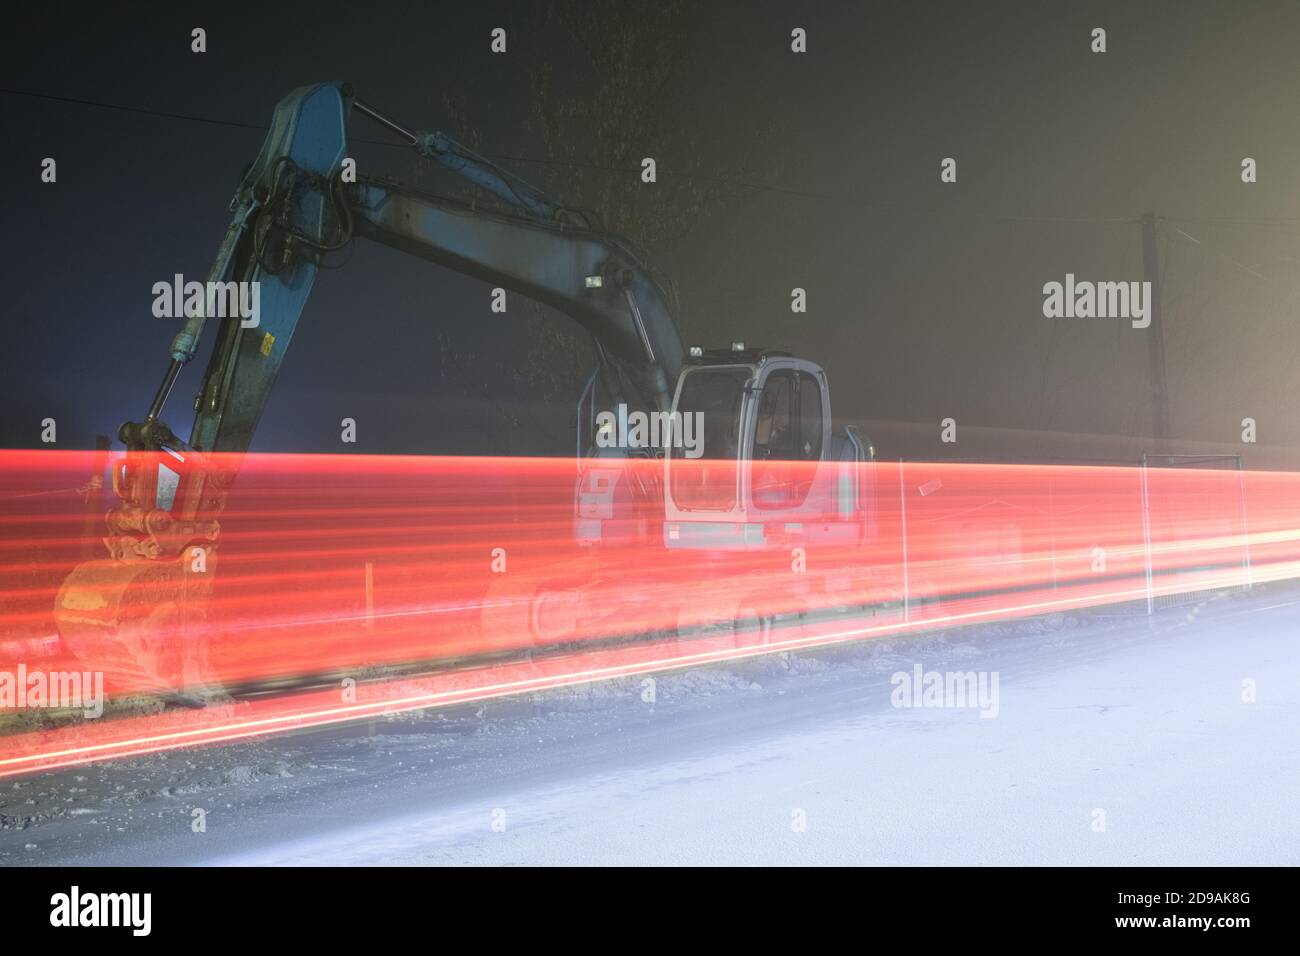 Blue excavator digger working at night on the street Stock Photo